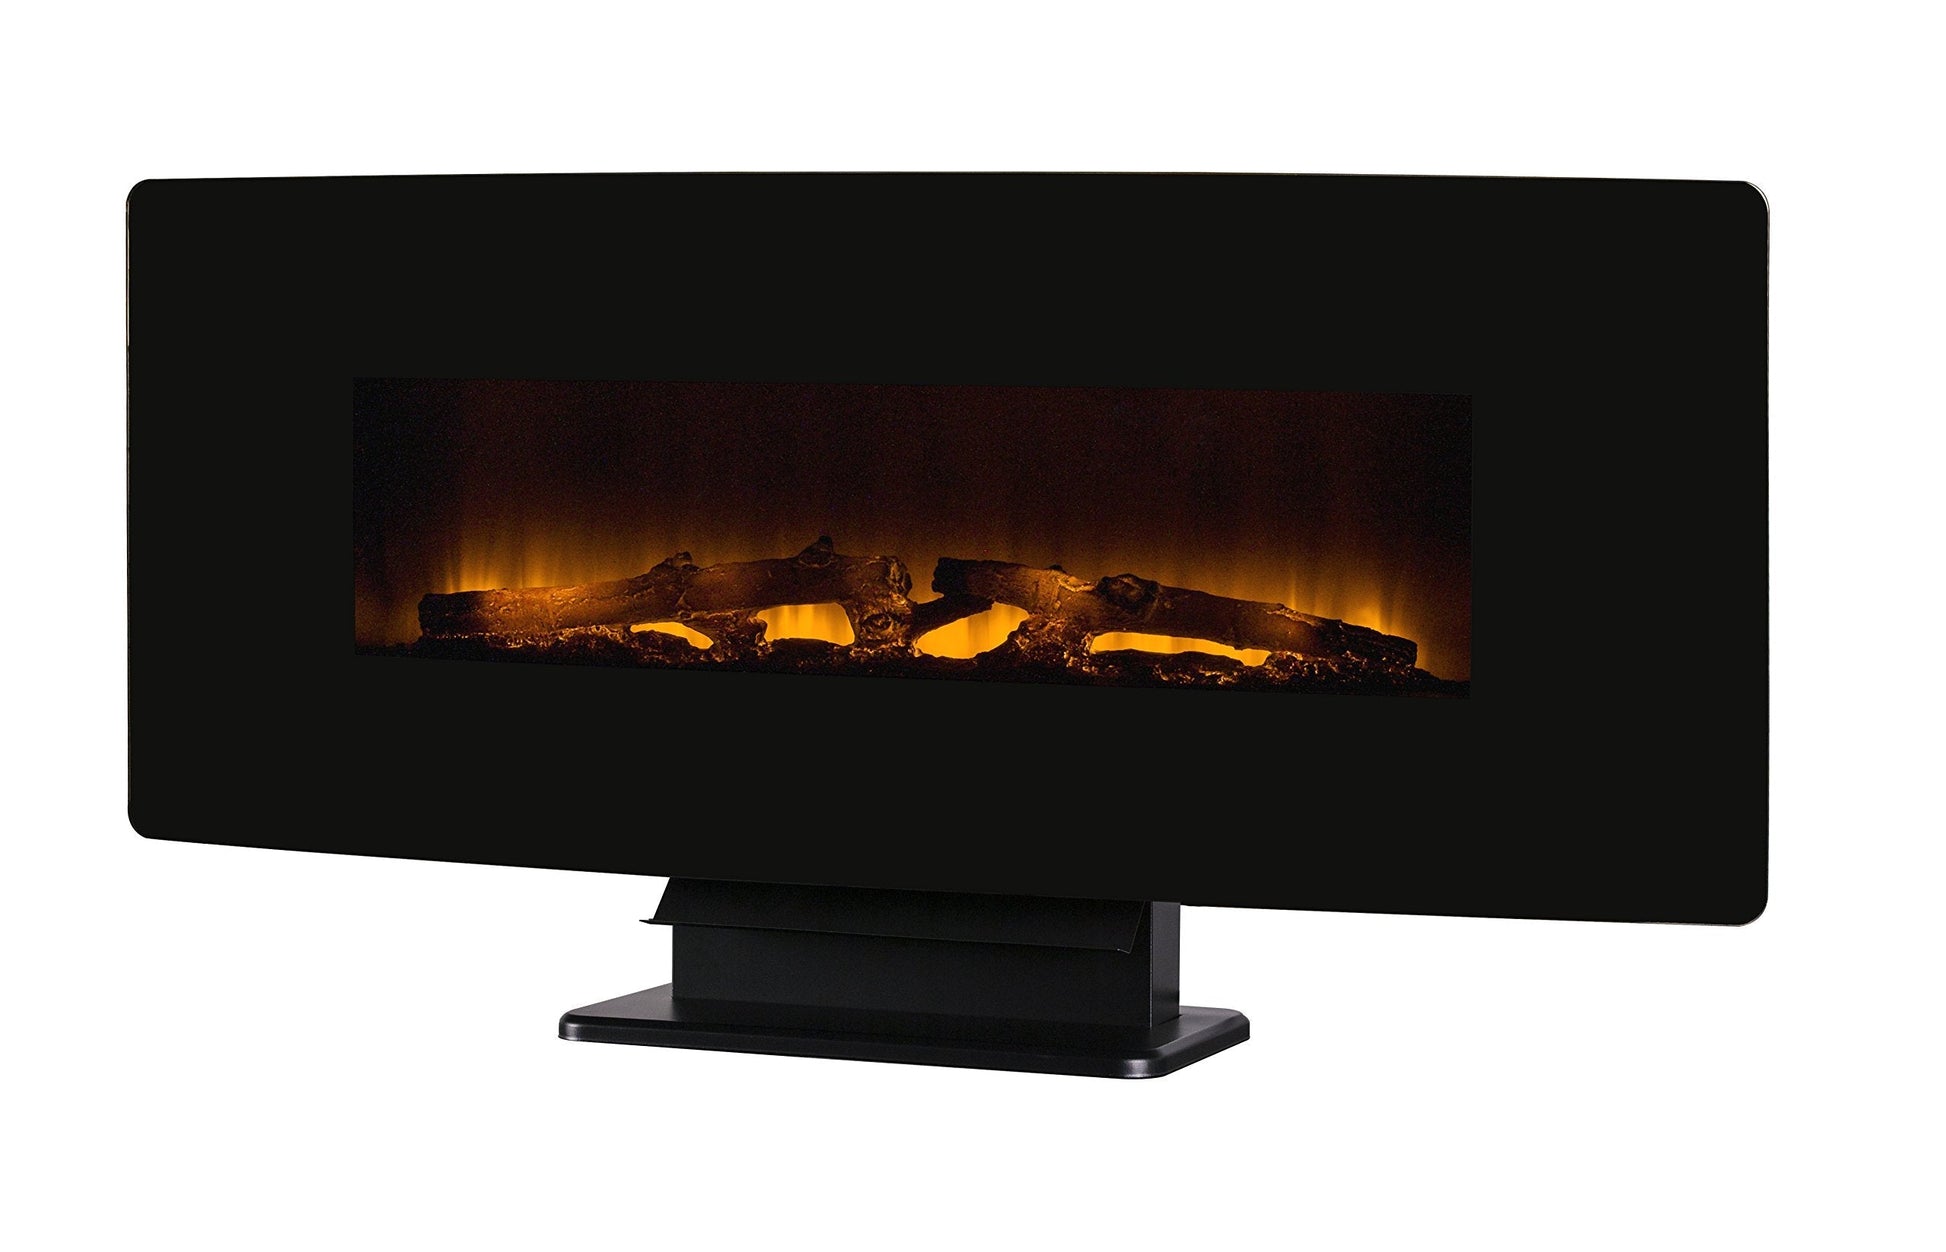 Muskoka Curved Front Black 42" Wall Mount Electric Fireplace Glass - Home Decor Gifts and More